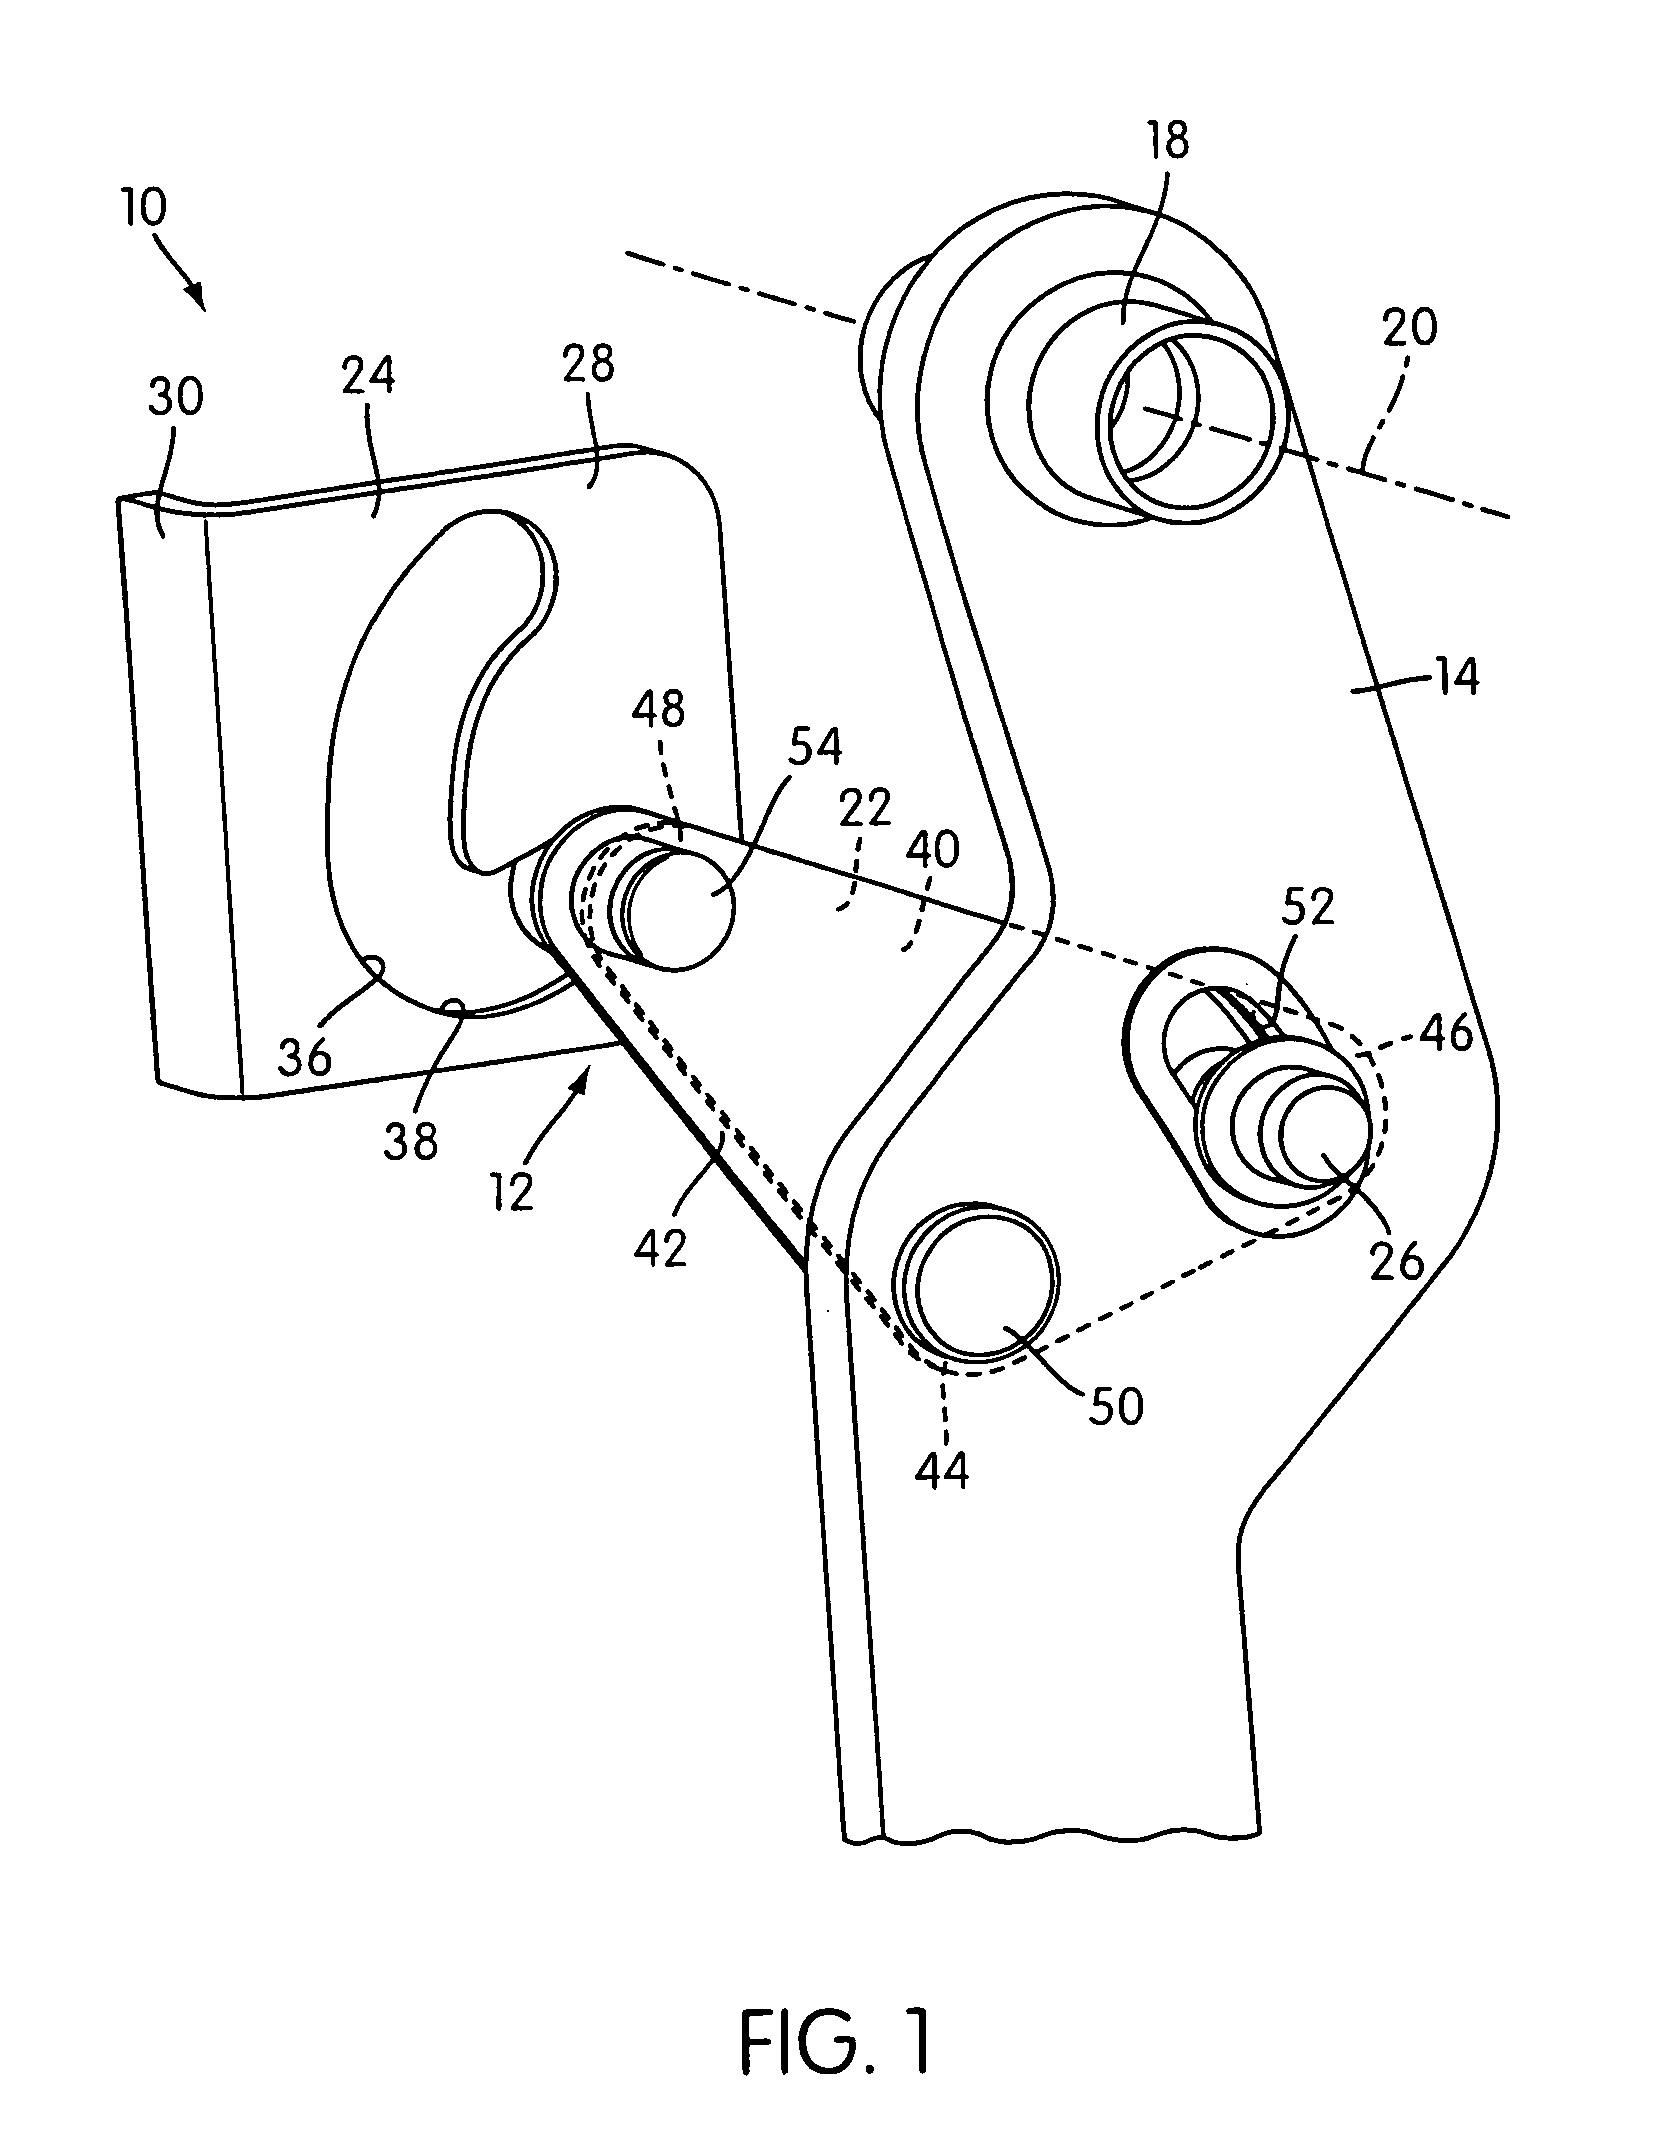 Variable ratio pedal assembly